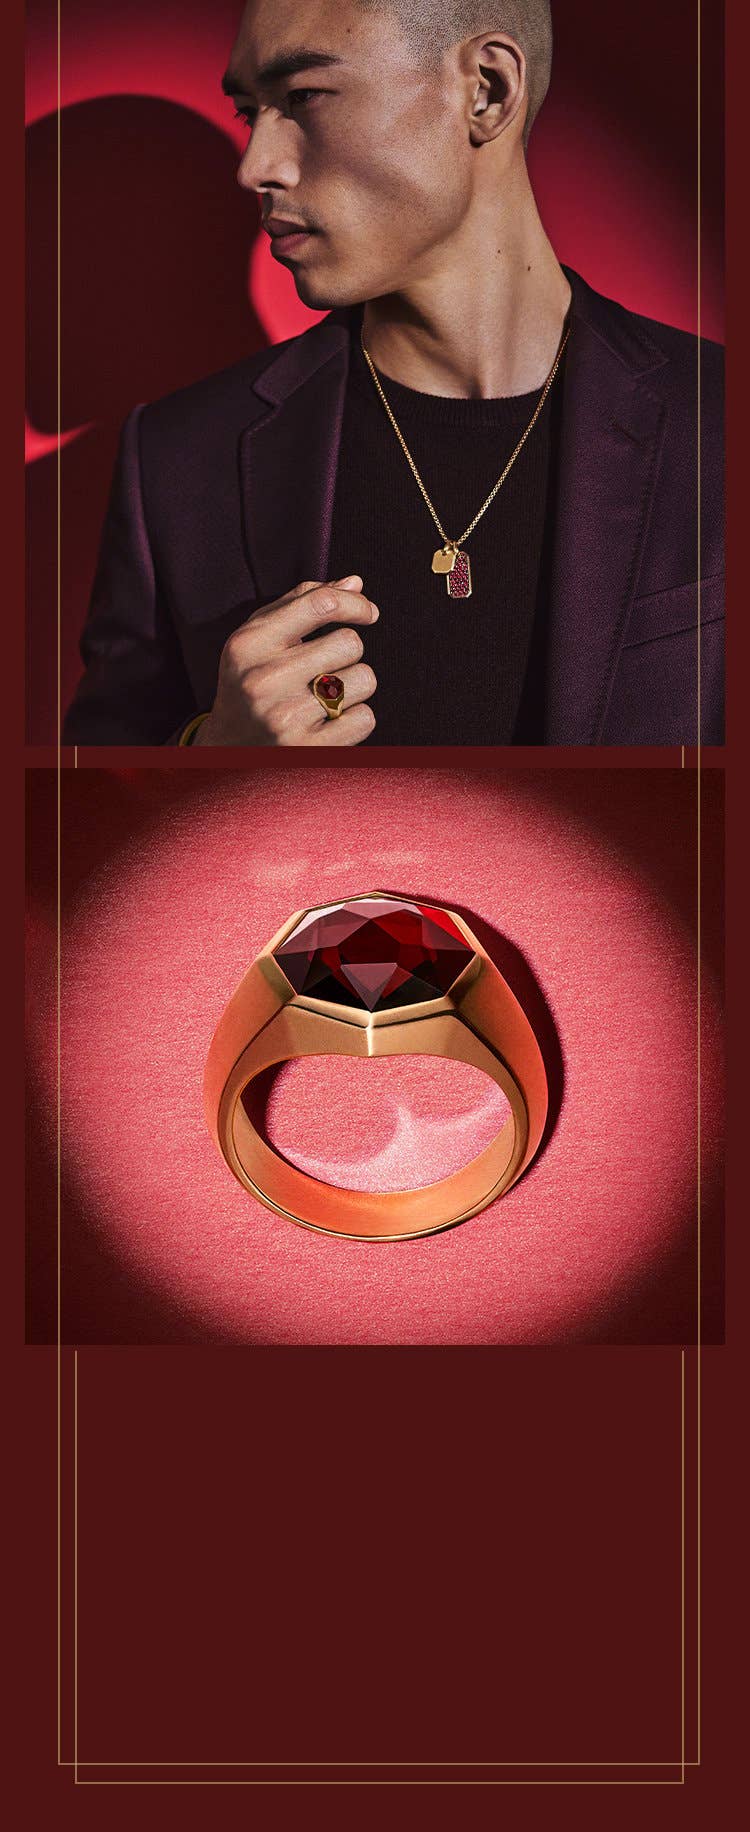 An image of a garnet and gold signet ring and a male model wearing gold amulets and ring.